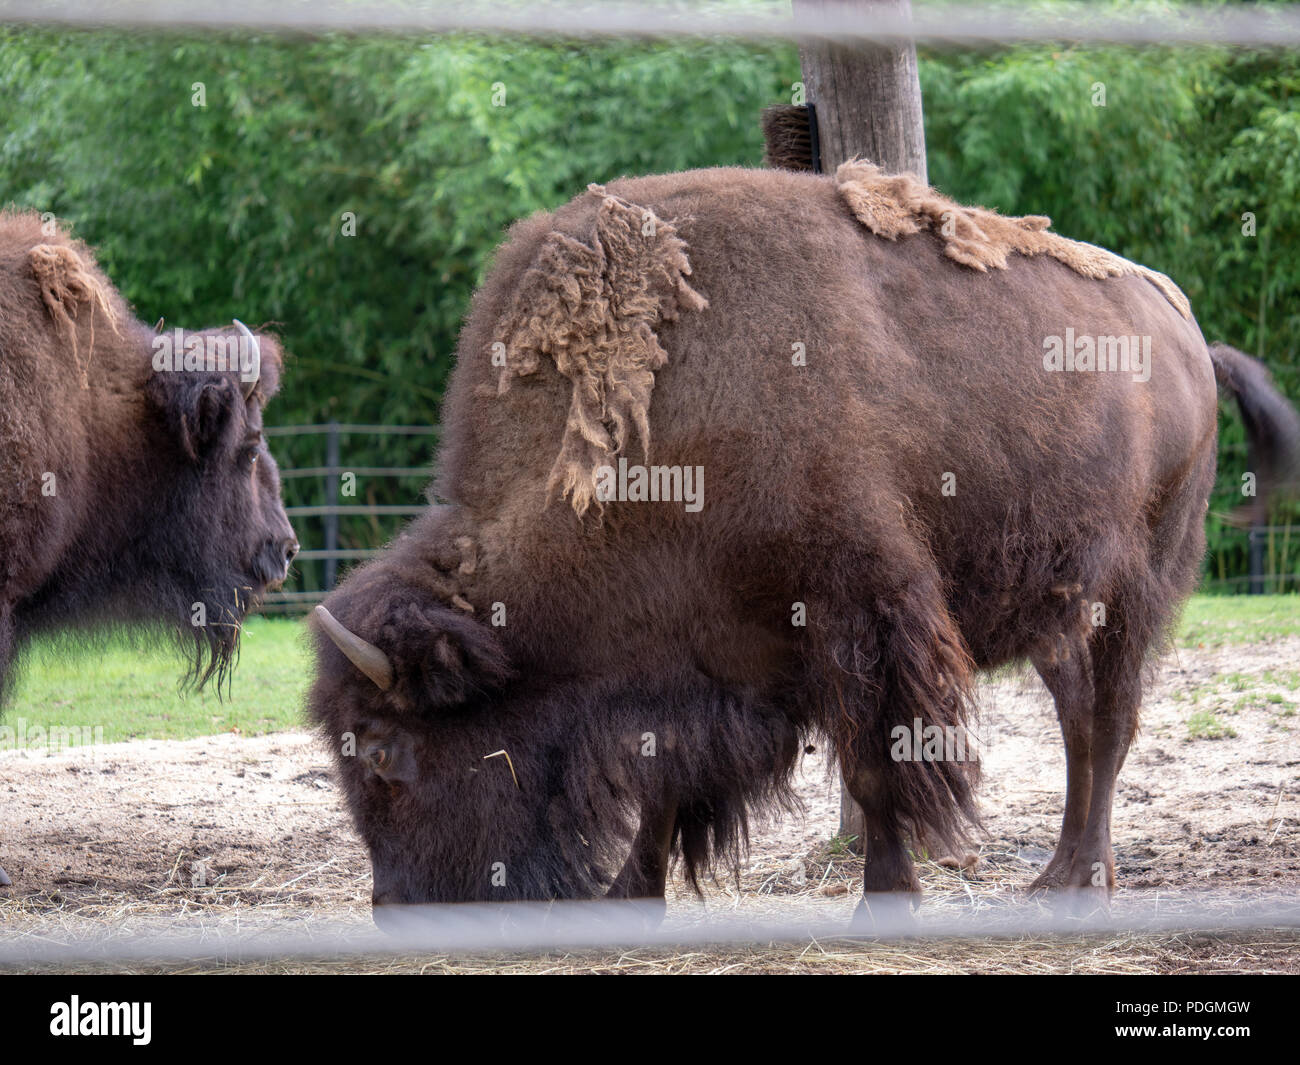 American bison Bison bison with overgrown fur coat grazing inside fence Stock Photo